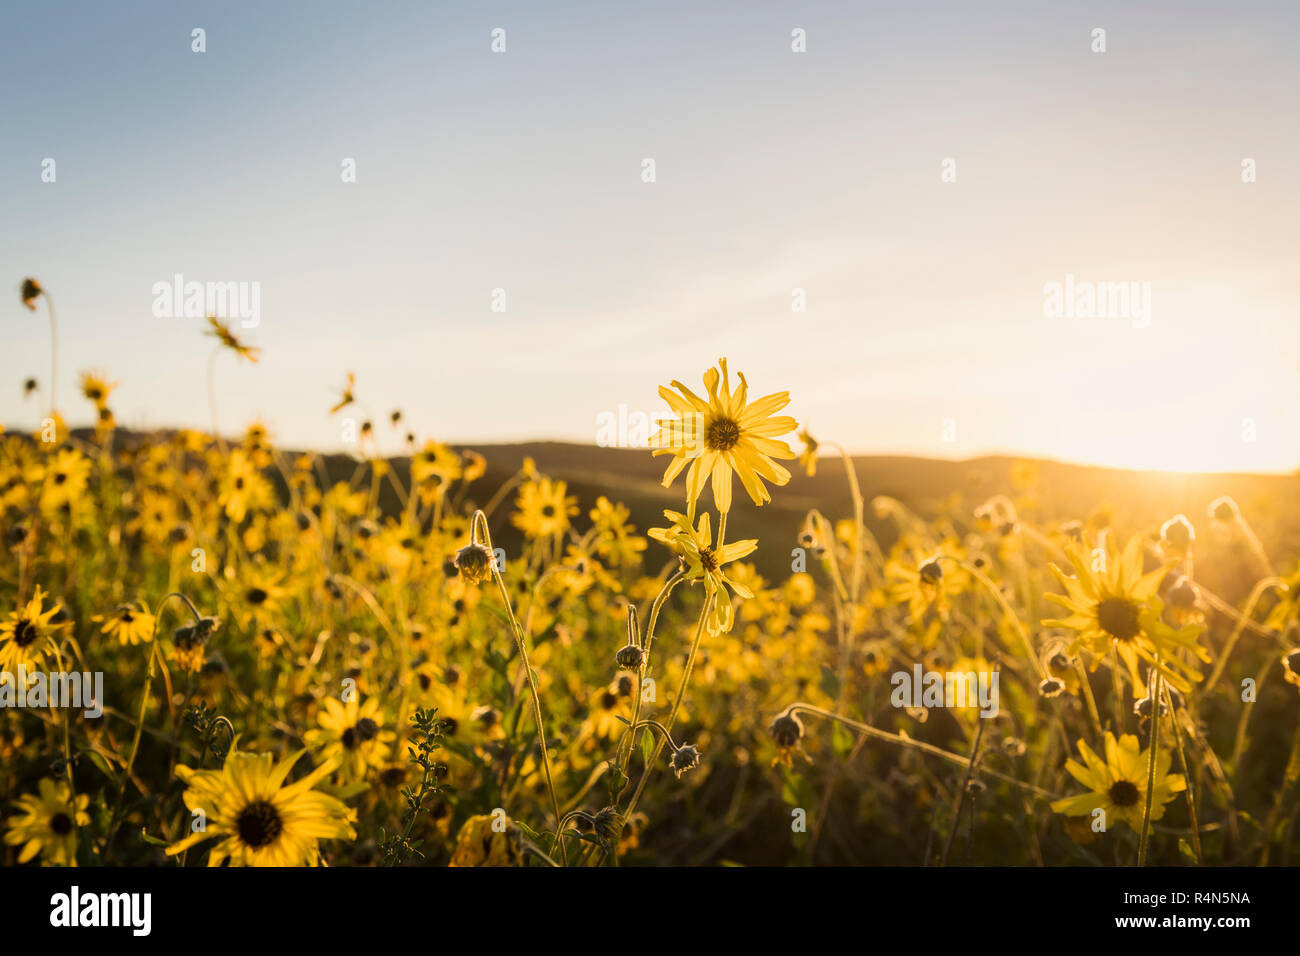 Meadow of yellow daisies Stock Photo